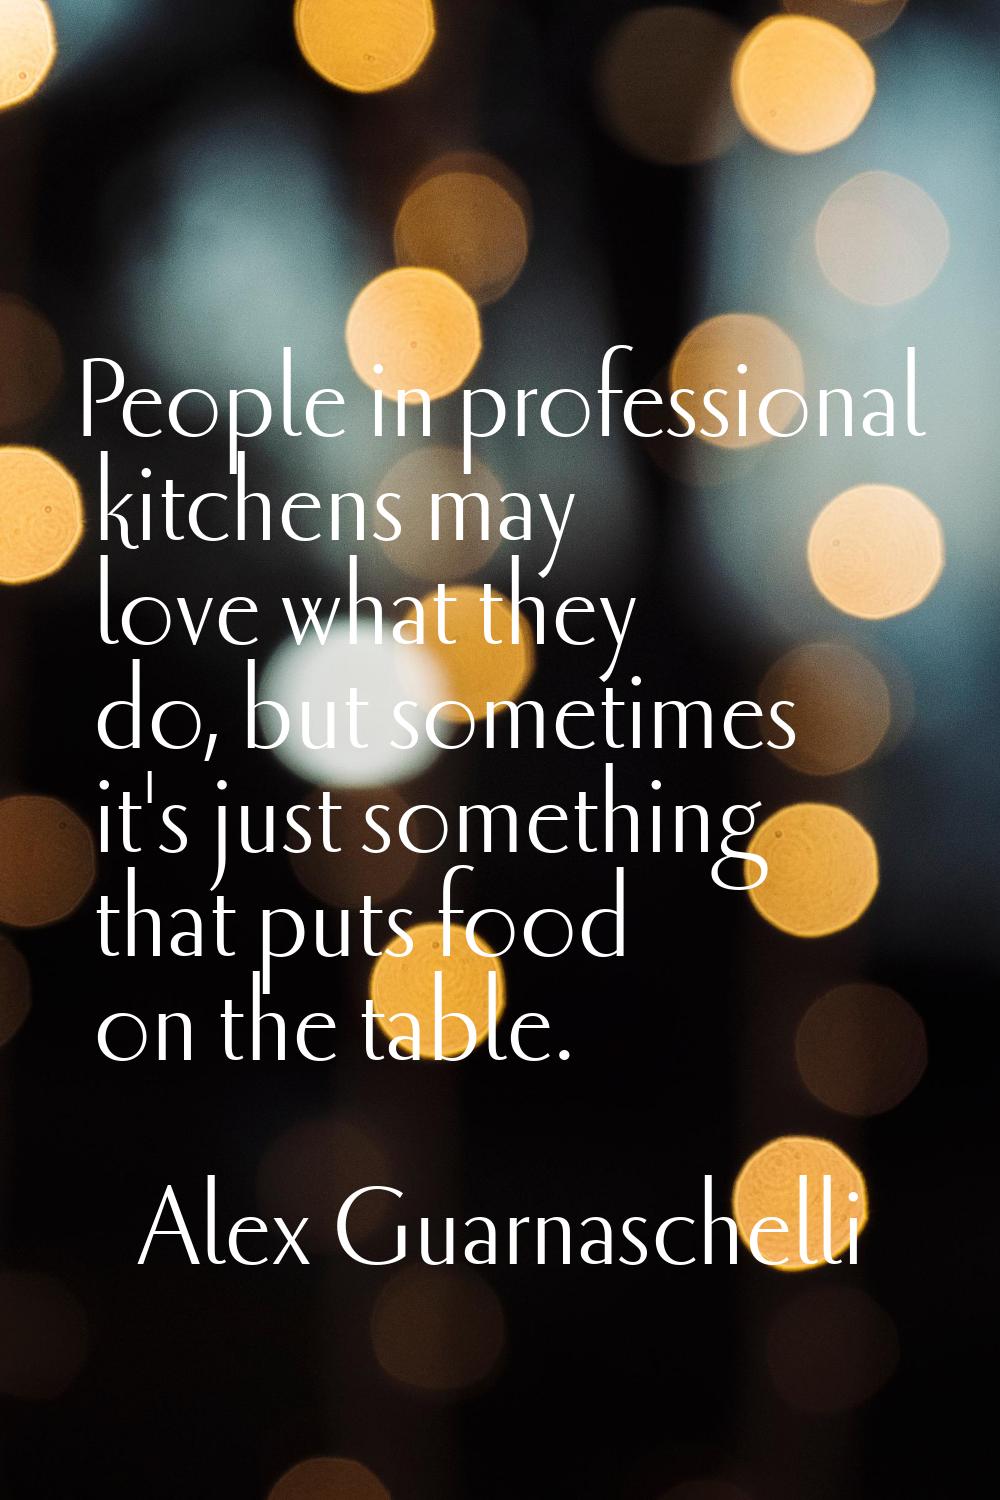 People in professional kitchens may love what they do, but sometimes it's just something that puts 